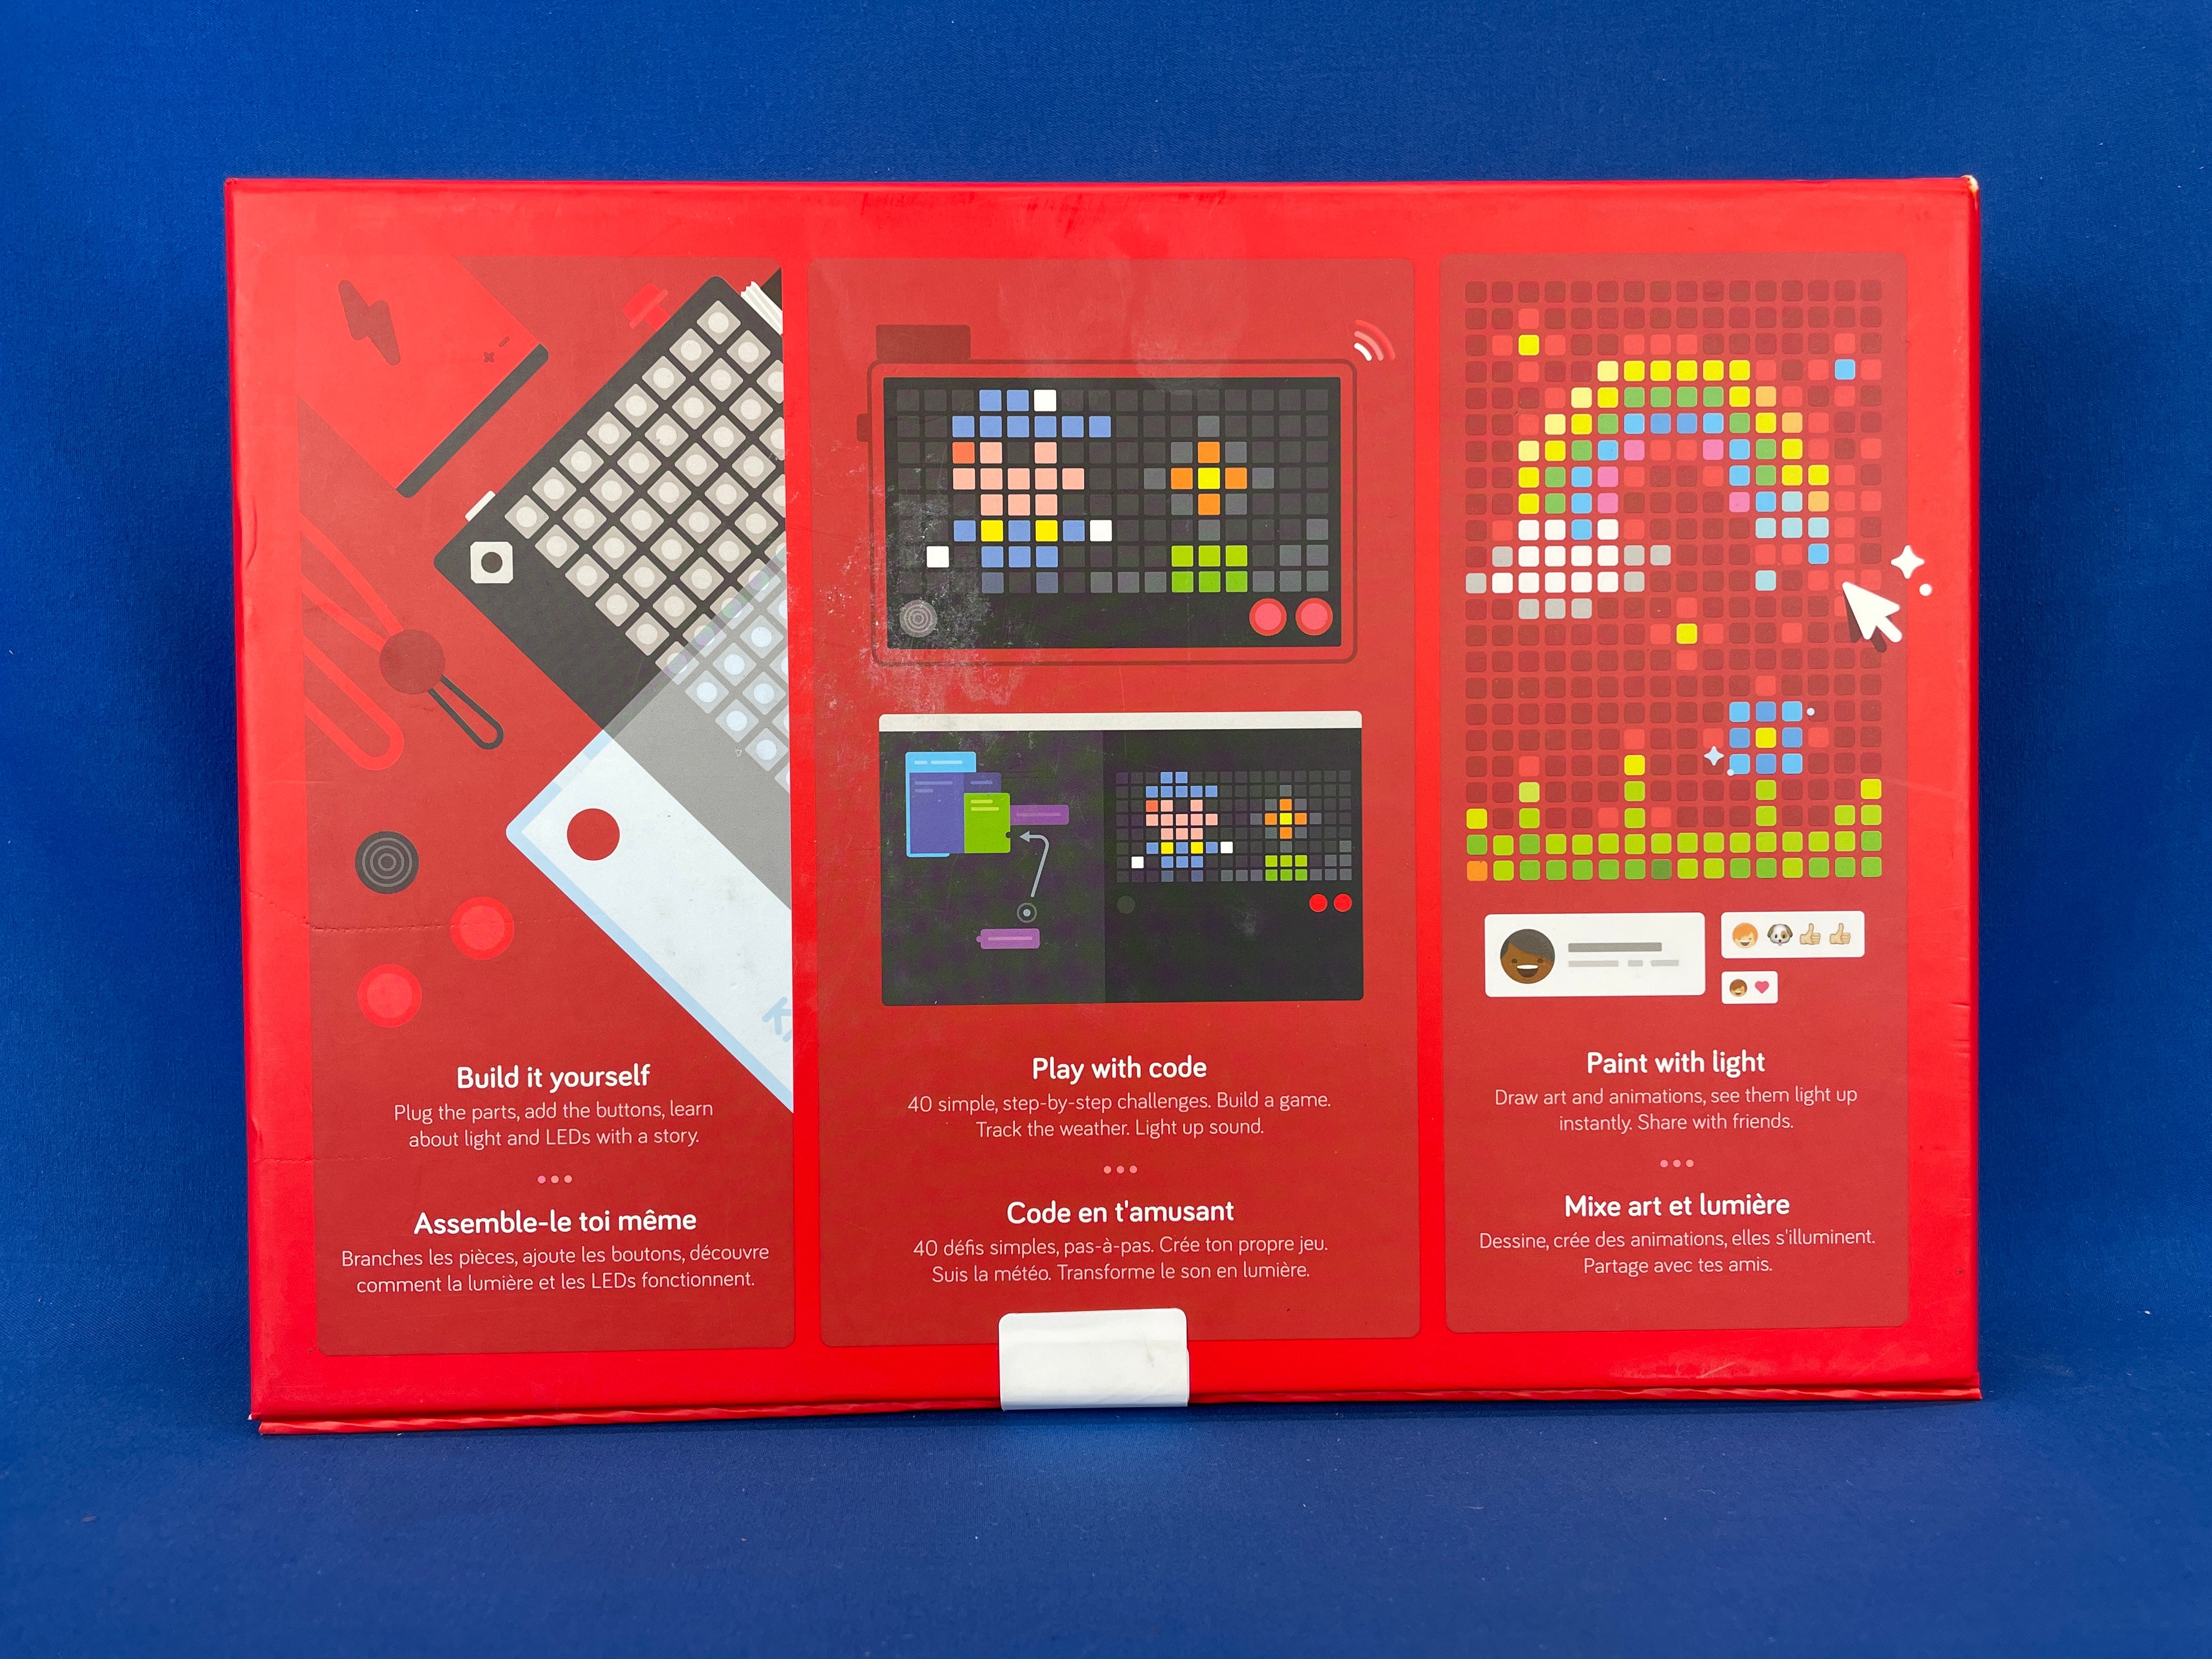 Kano Pixel Kit | Learn to Code with Light